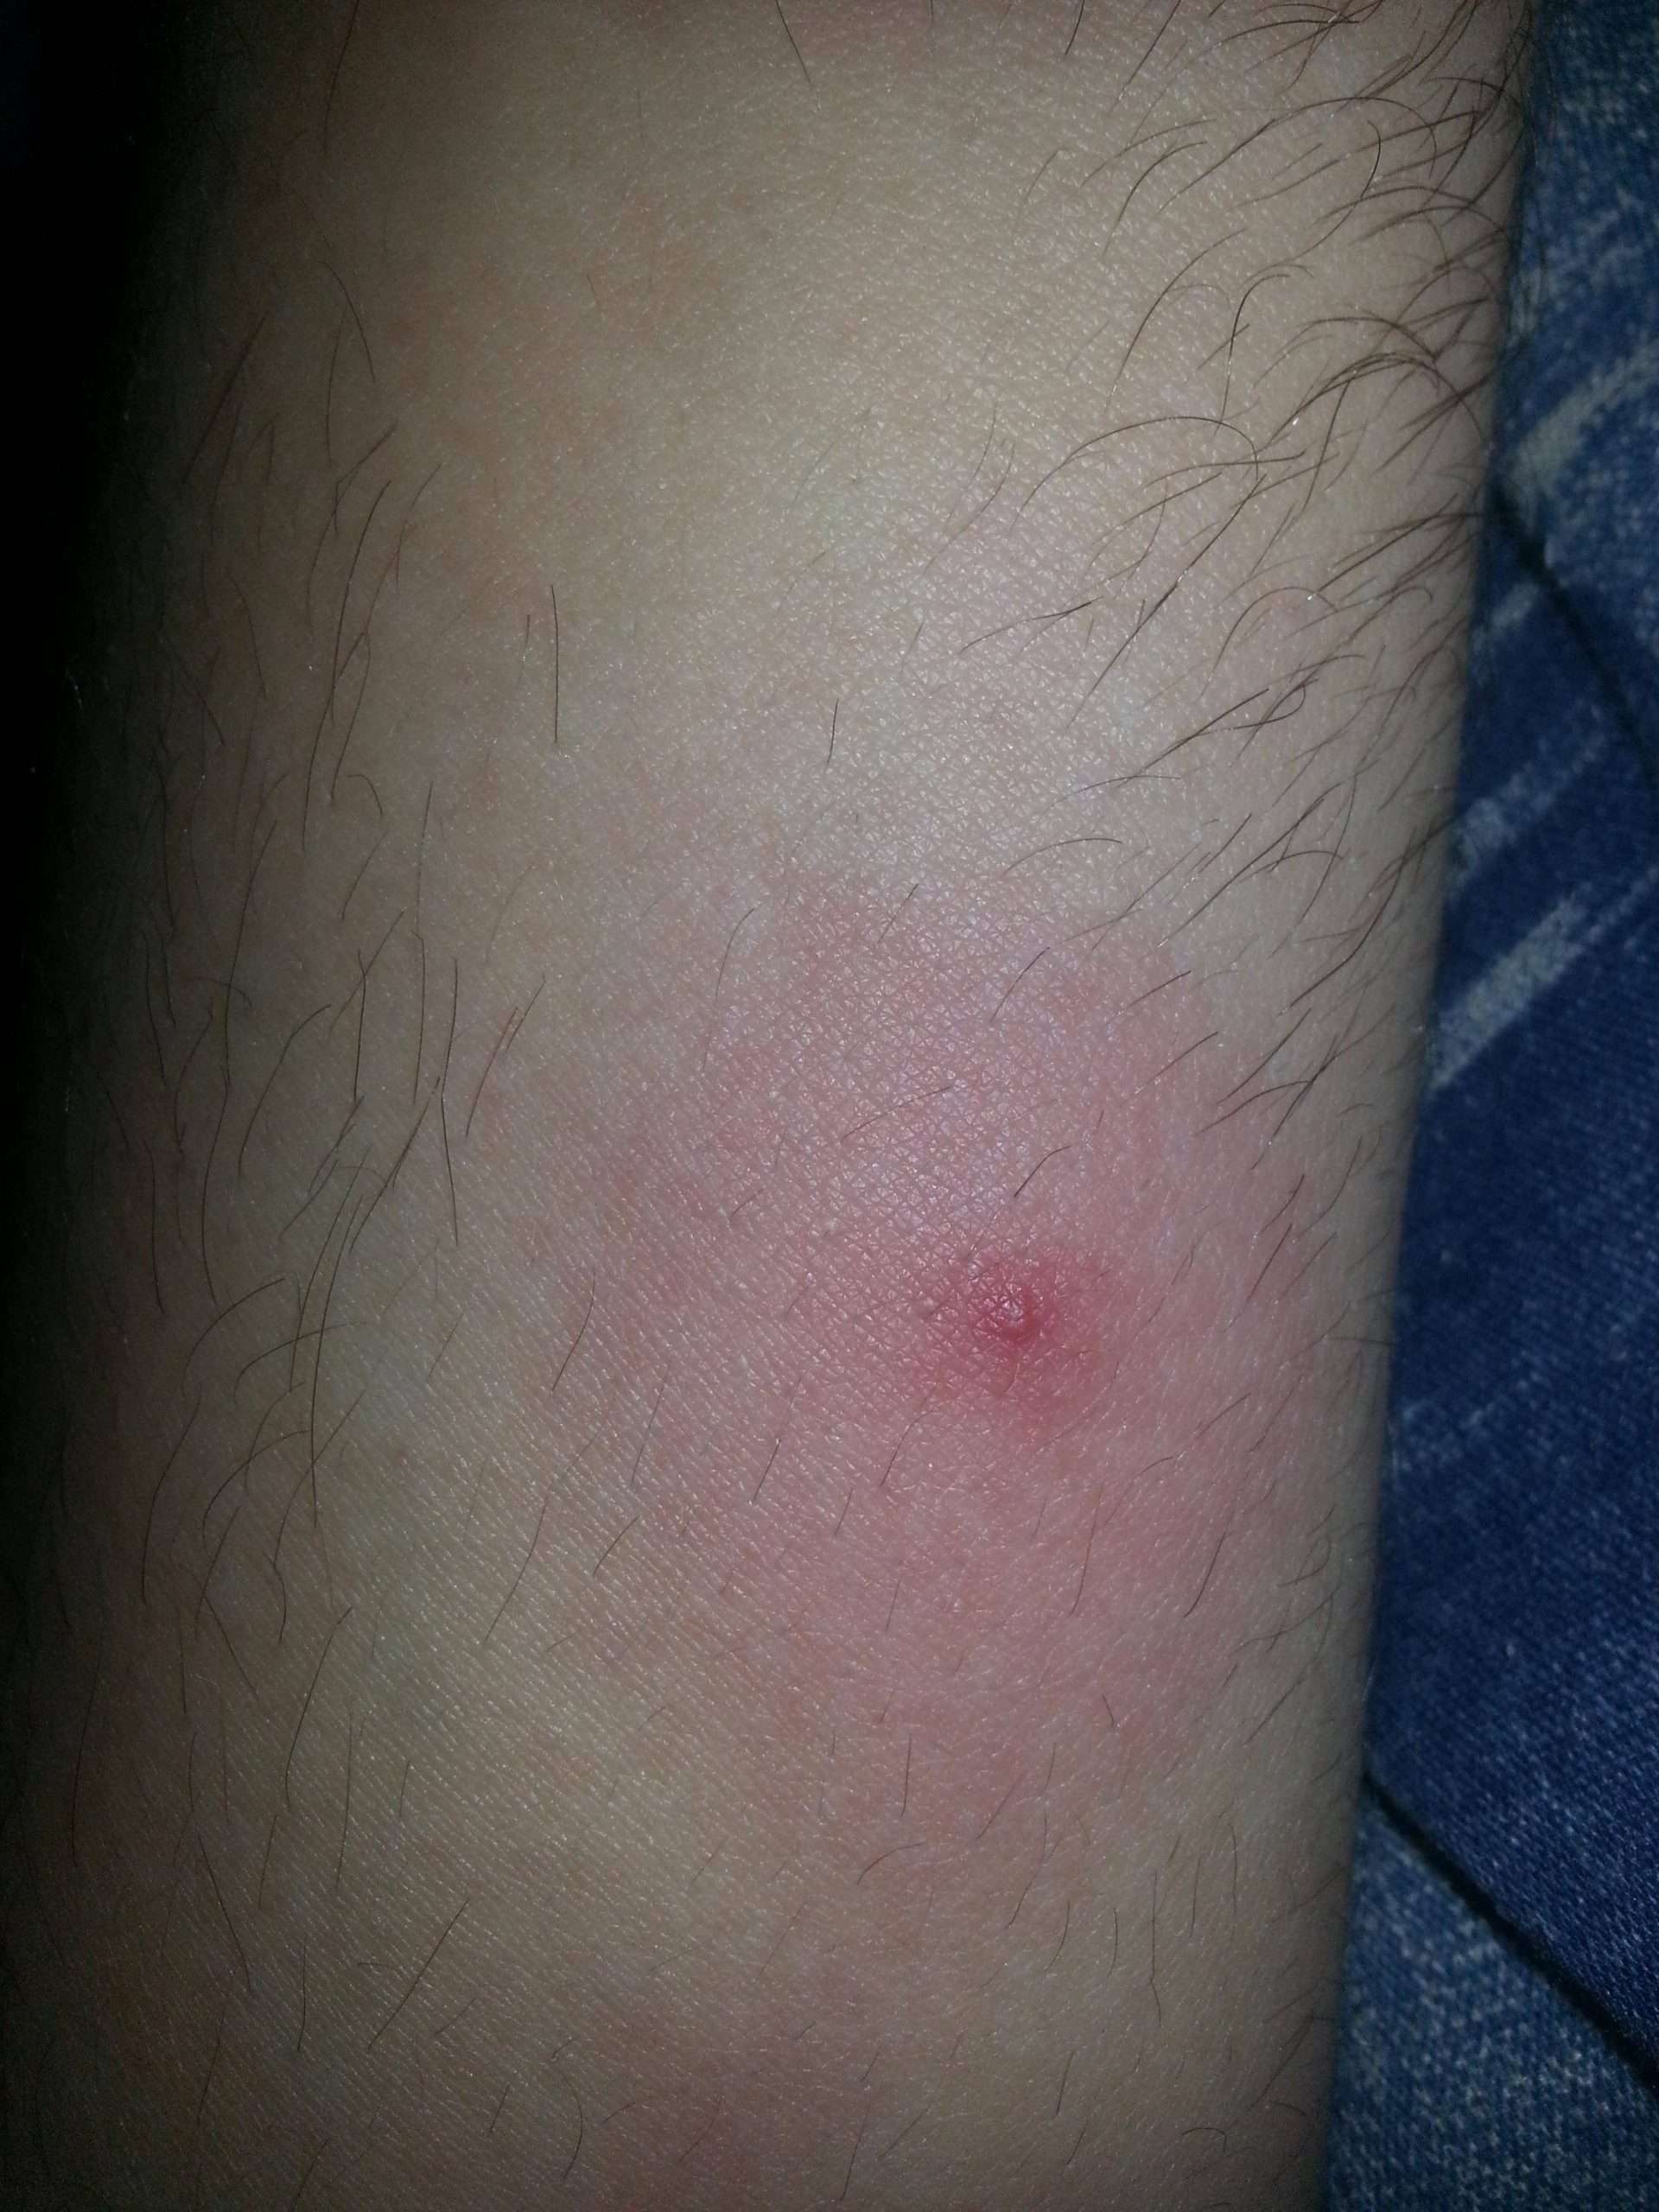 Live in RI, worried about lyme disease after getting bit by something ...